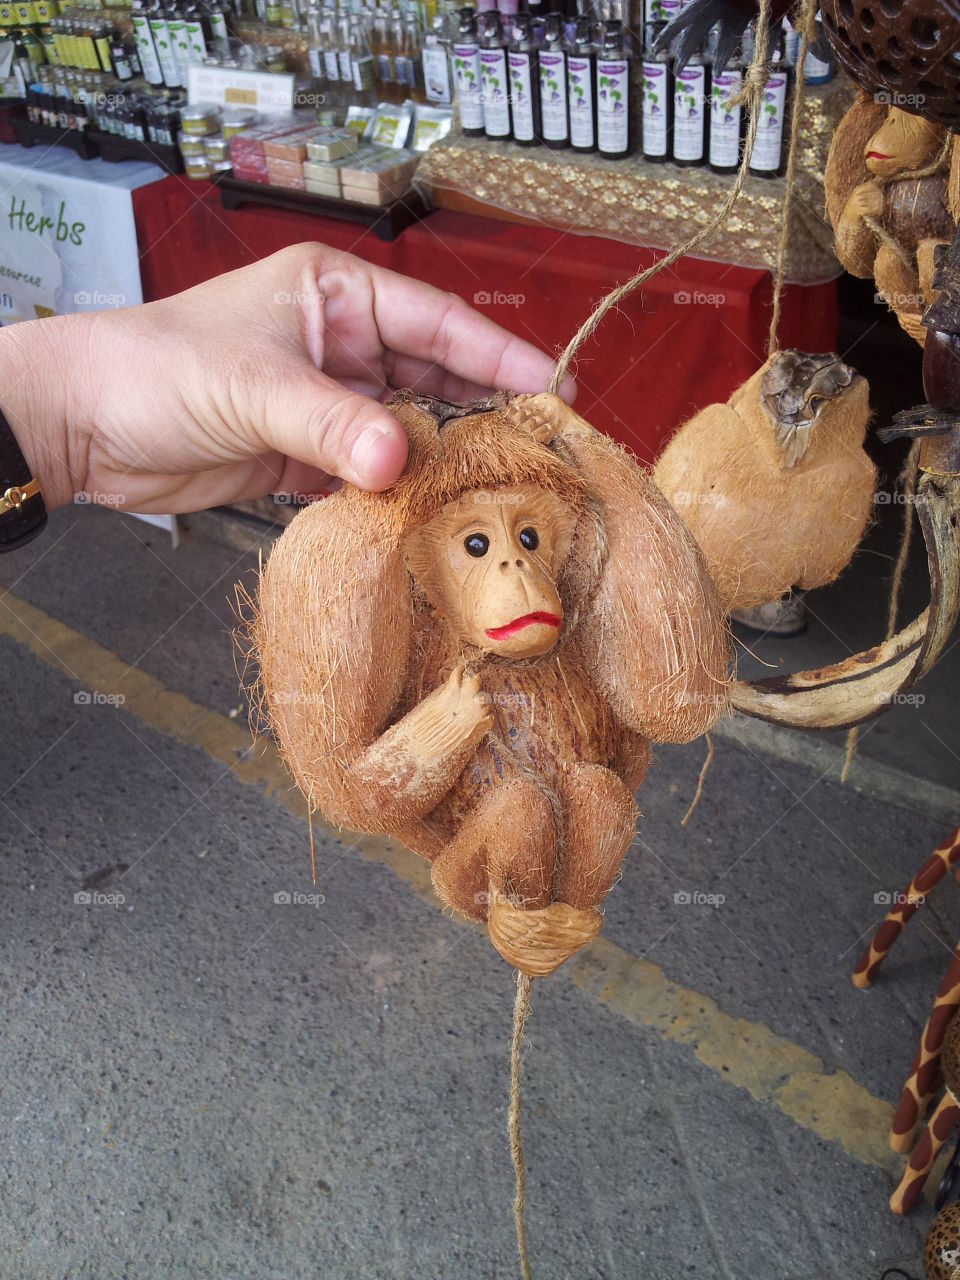 Coconut monkey 
Creative idea everything possible 